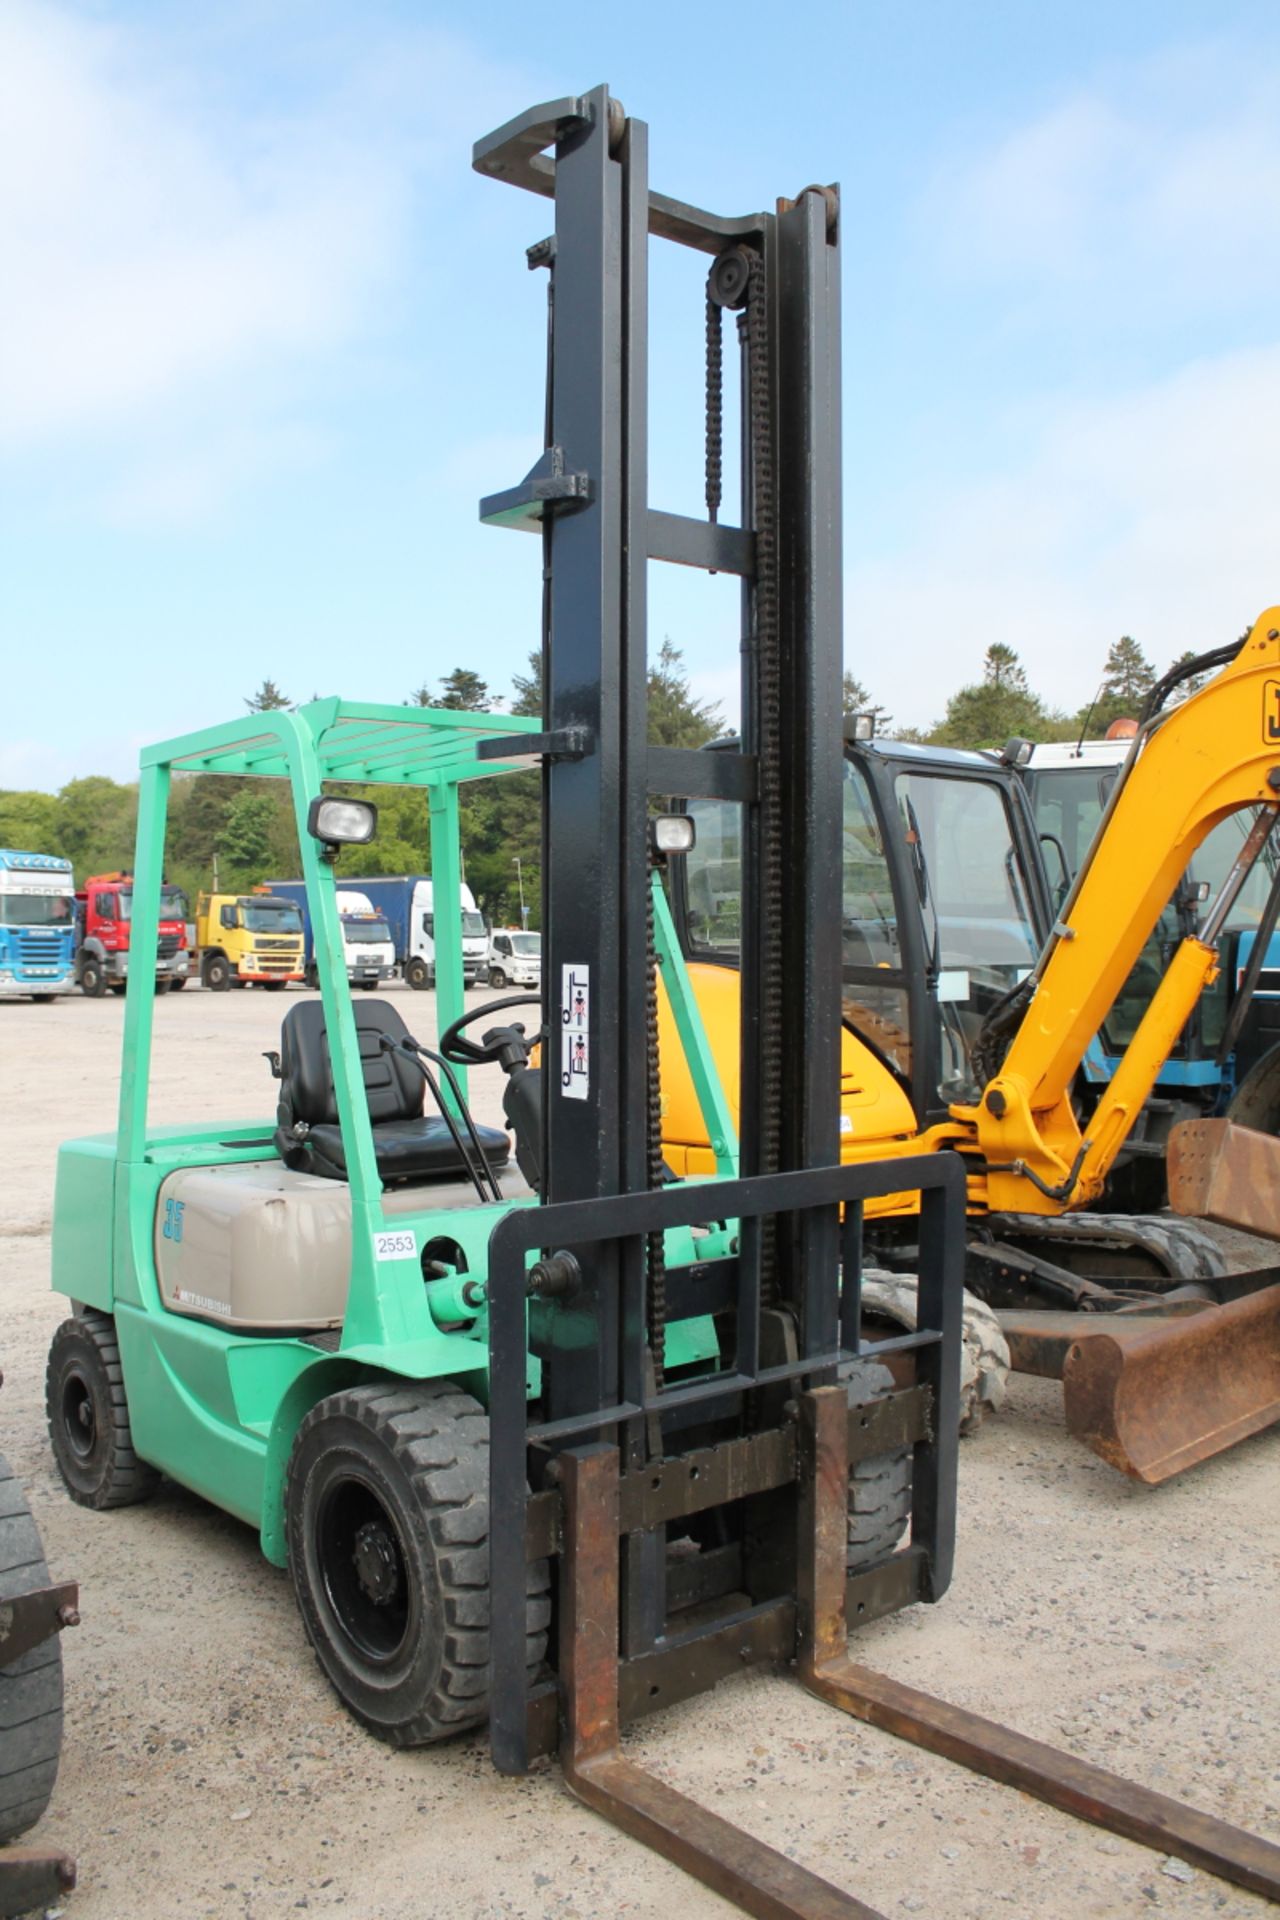 Mitsubishi Forklift FD35A, EF.14c.60583, Lifting cert here, 4814 Hours, Year 1998, + VAT